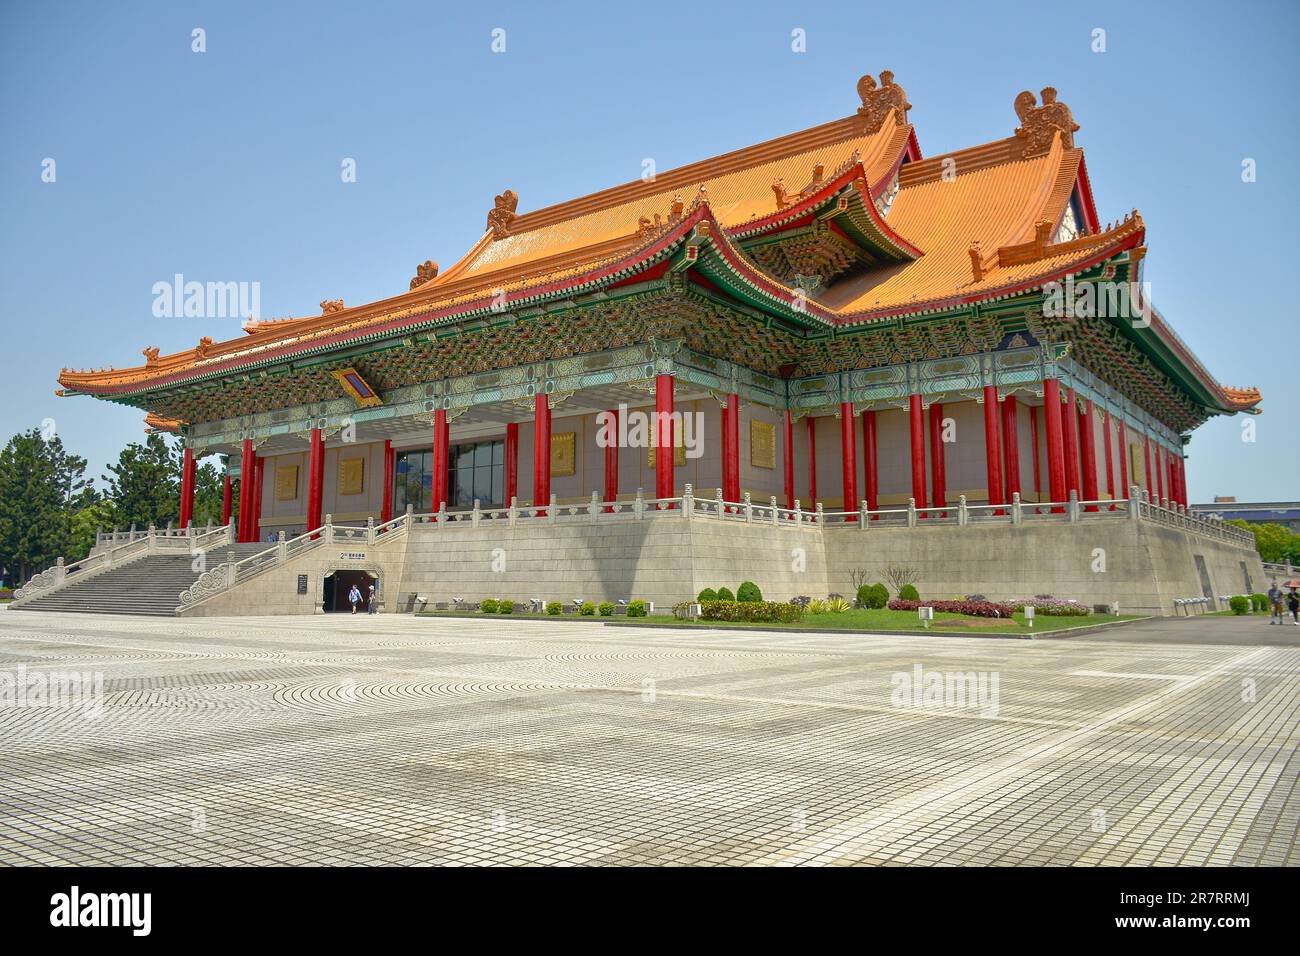 National Concert Hall at Liberty Square in the area of Chiang Kai-shek Memorial Hall, a very famous tourist destination in Taipei, Taiwan Stock Photo